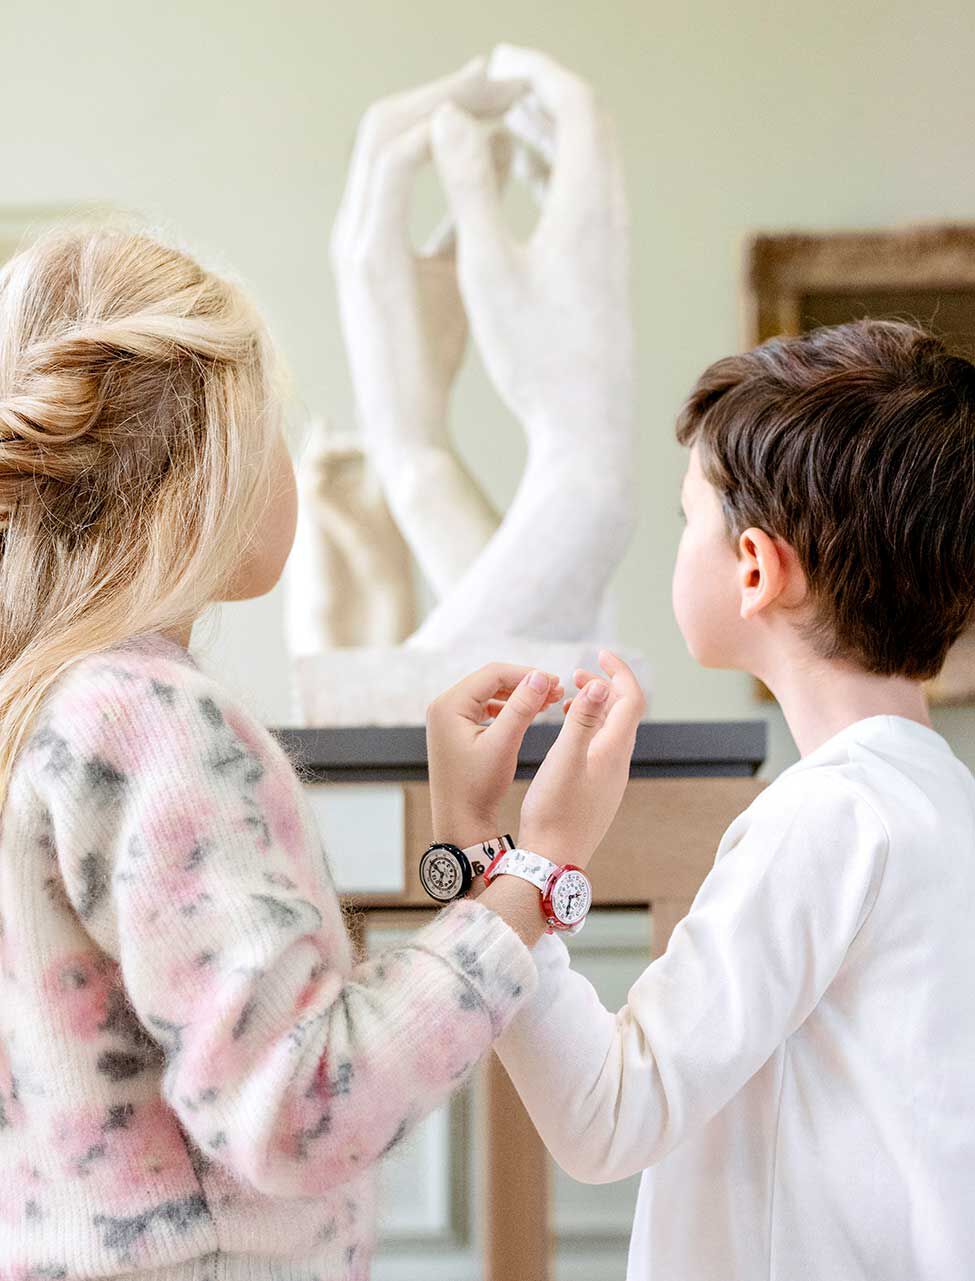 Kids recreating a sculpture with their hands